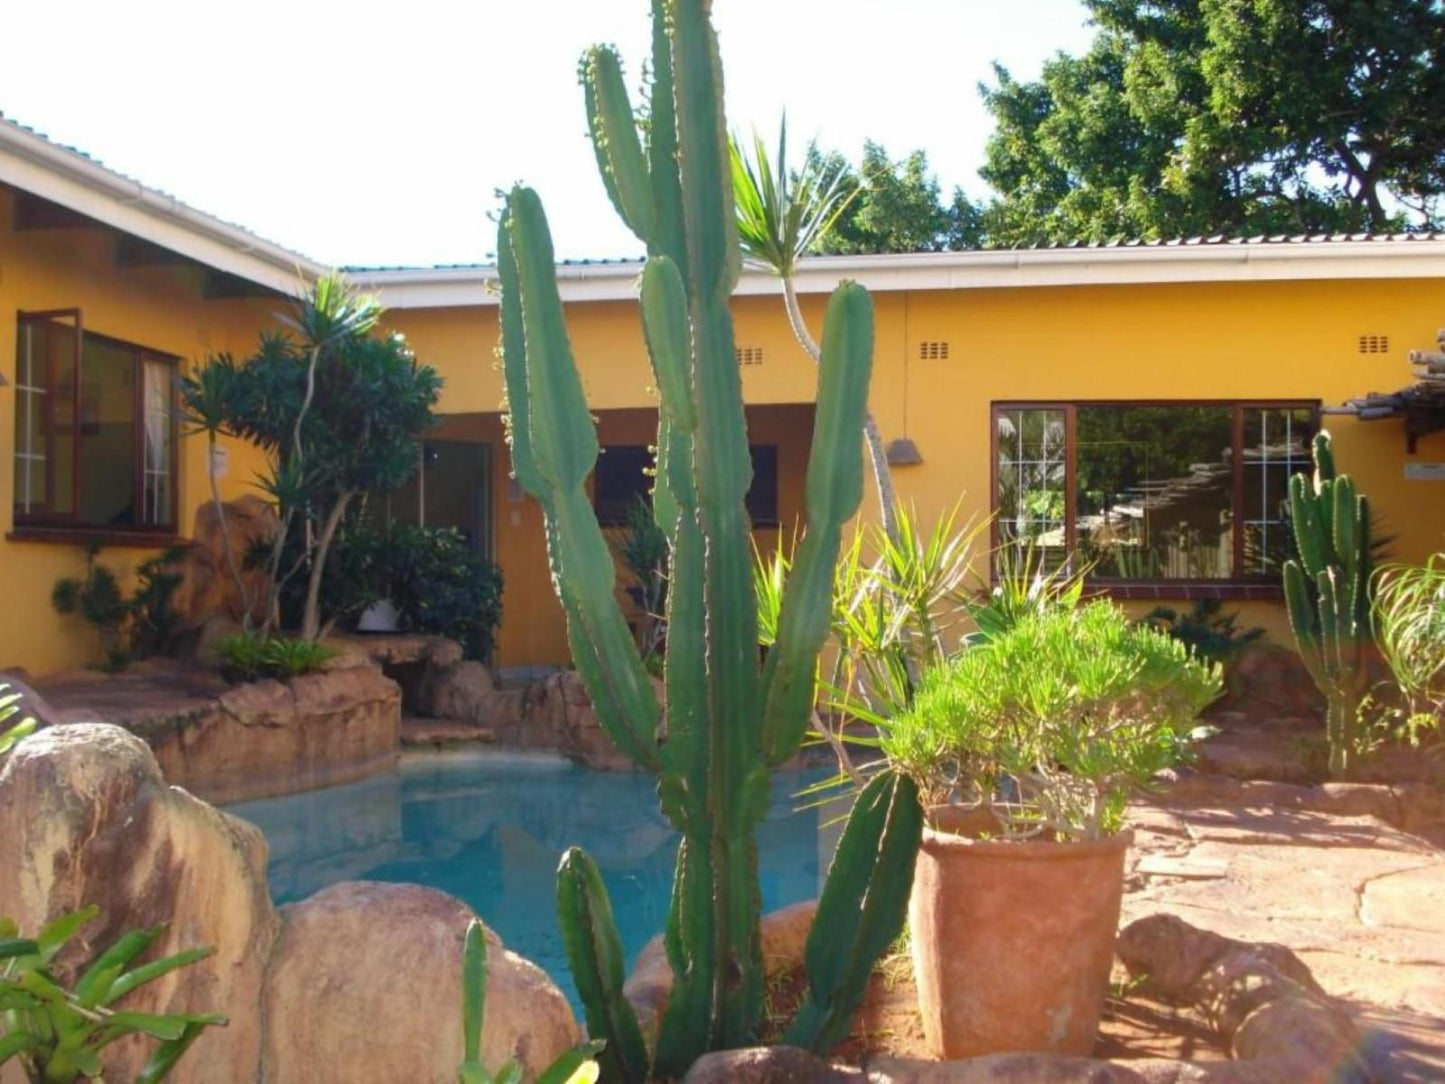 Flintstones Guest House Durban Durban North Durban Kwazulu Natal South Africa House, Building, Architecture, Palm Tree, Plant, Nature, Wood, Garden, Swimming Pool